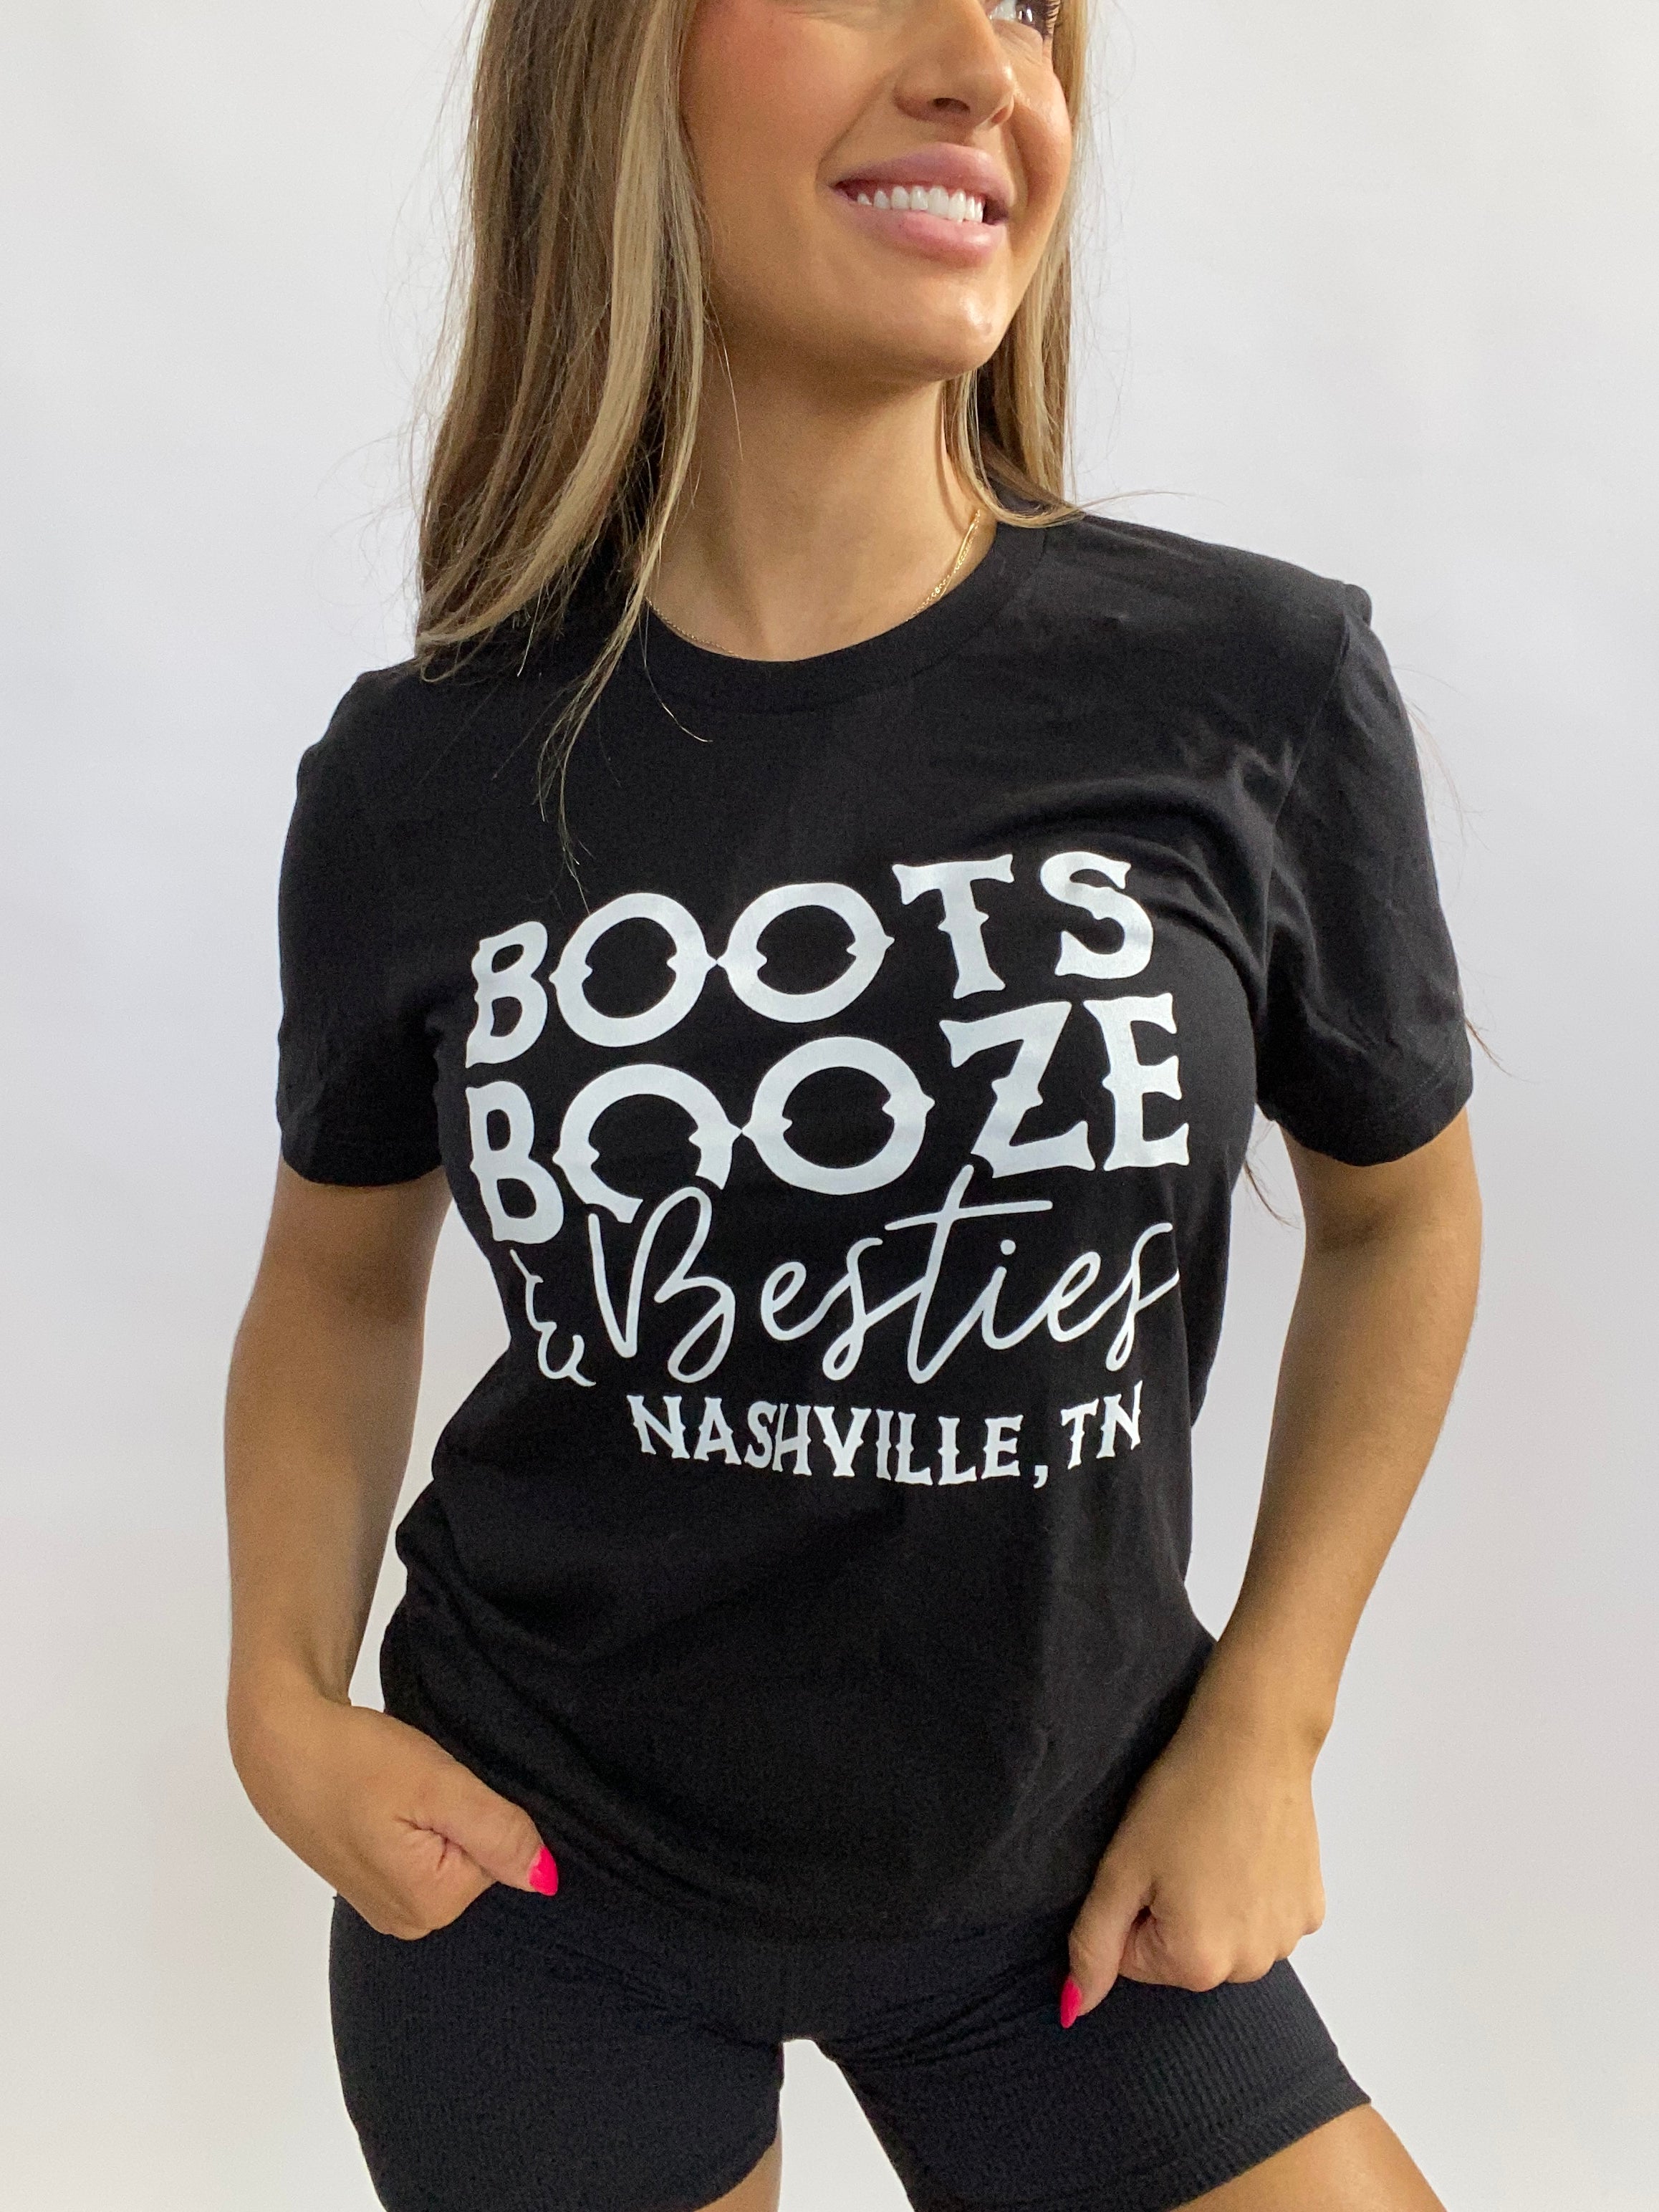 Boots Booze and Besties Graphic Tee- Black